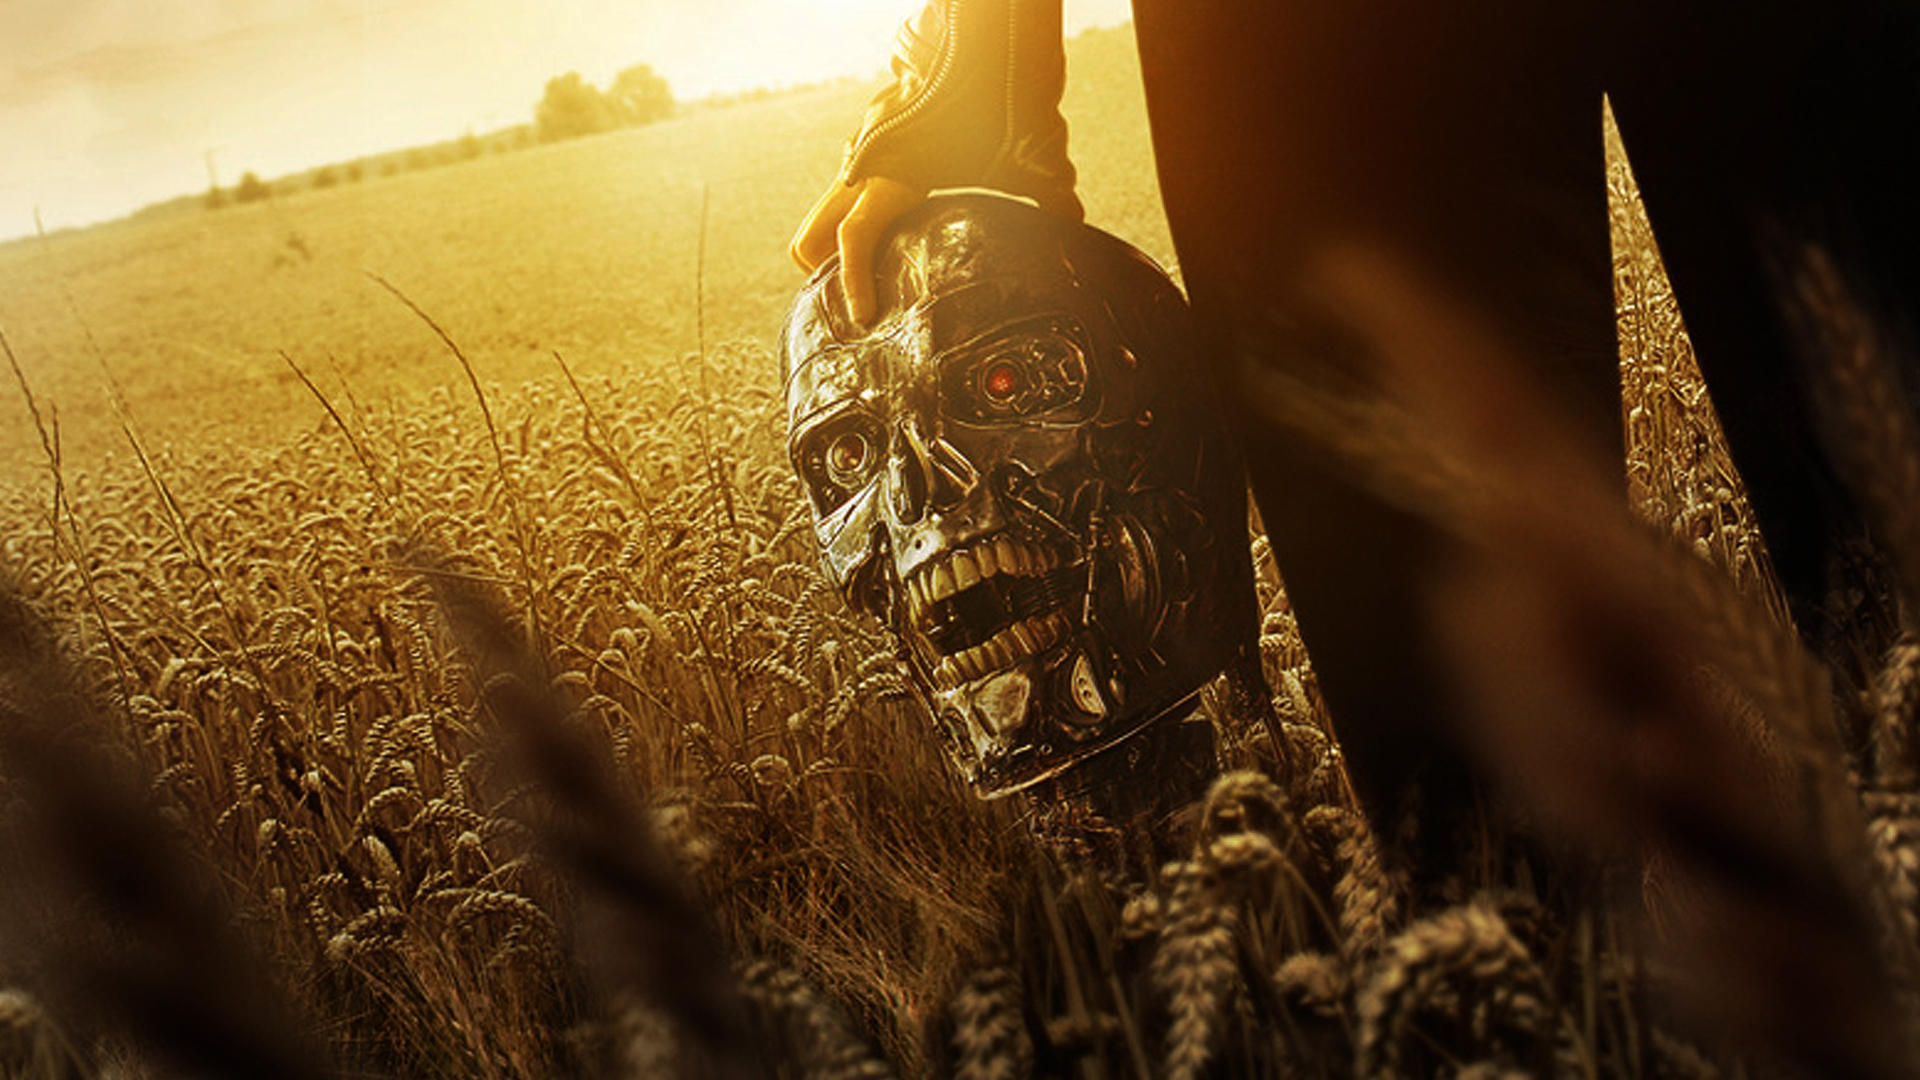 Terminator Genisys Wallpaper By Sachso74